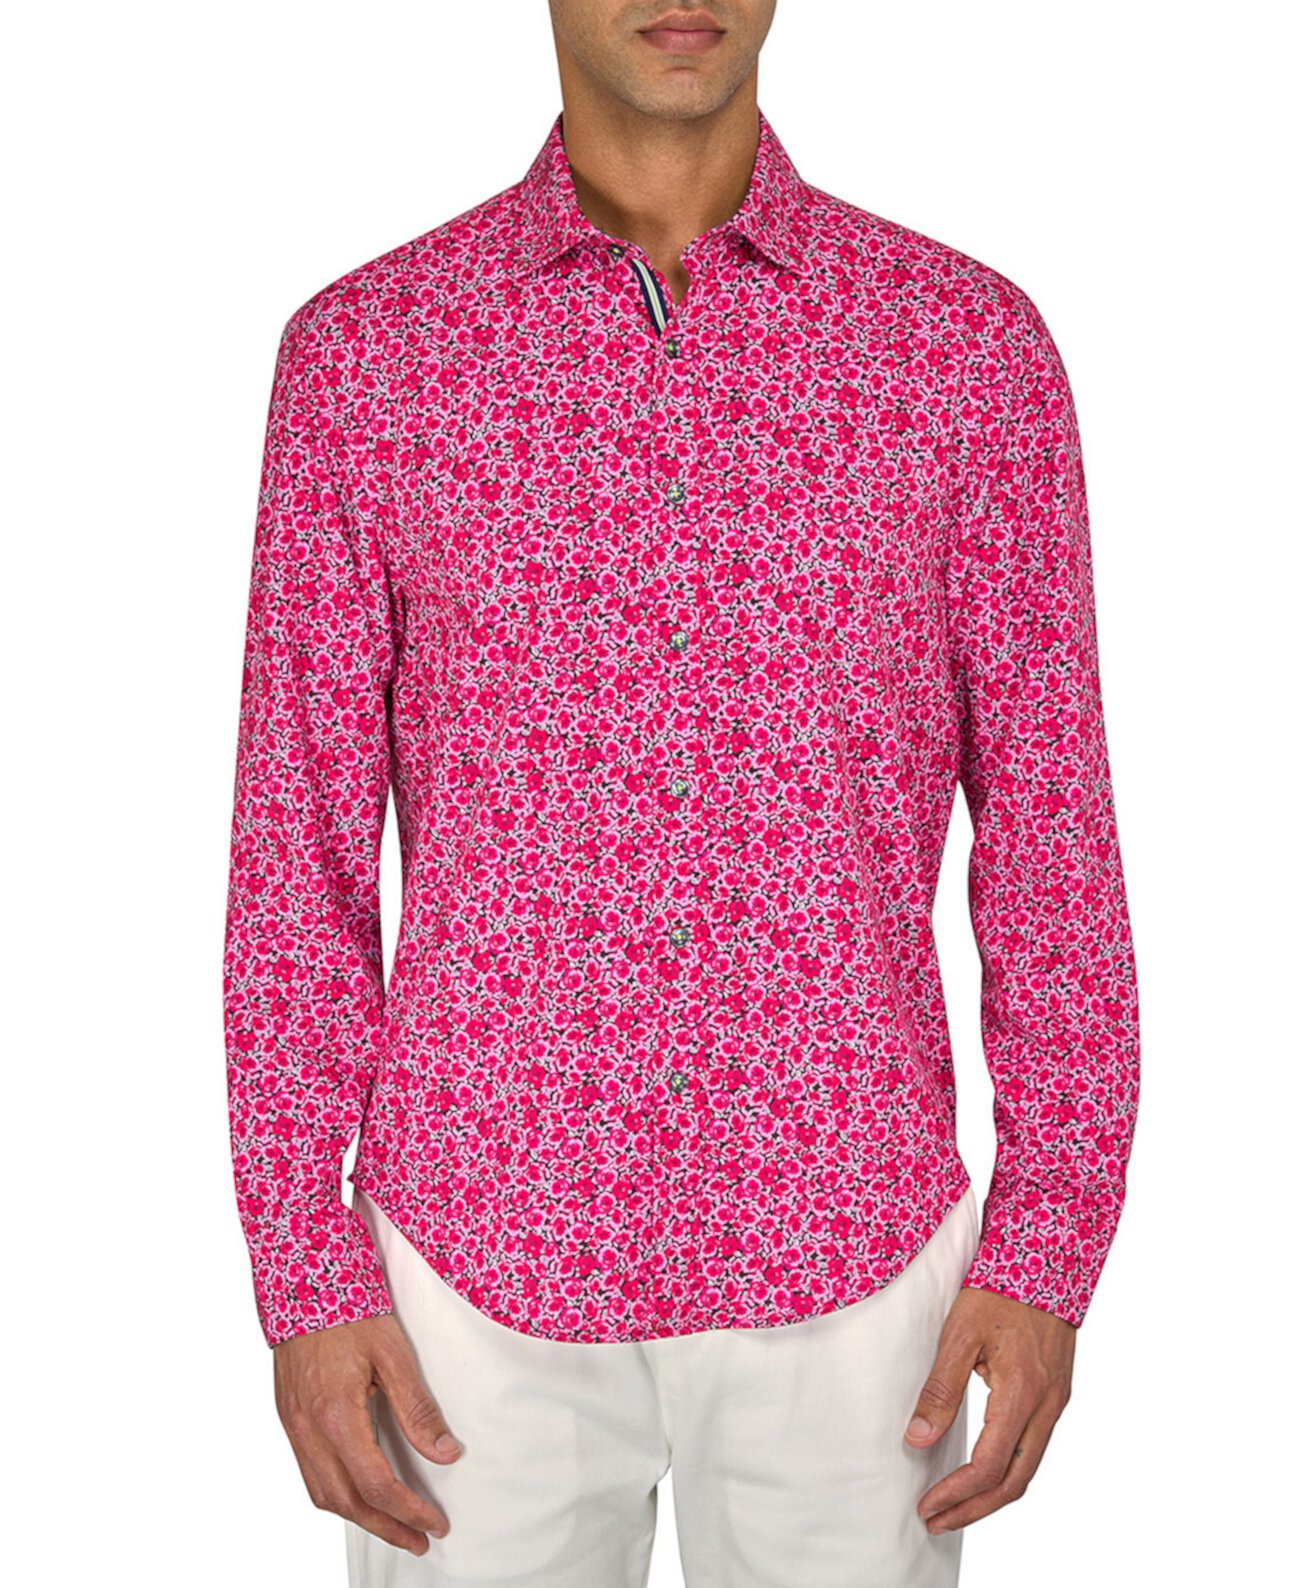 Men's Regular-Fit Non-Iron Performance Stretch Rose-Print Button-Down Shirt Society of Threads